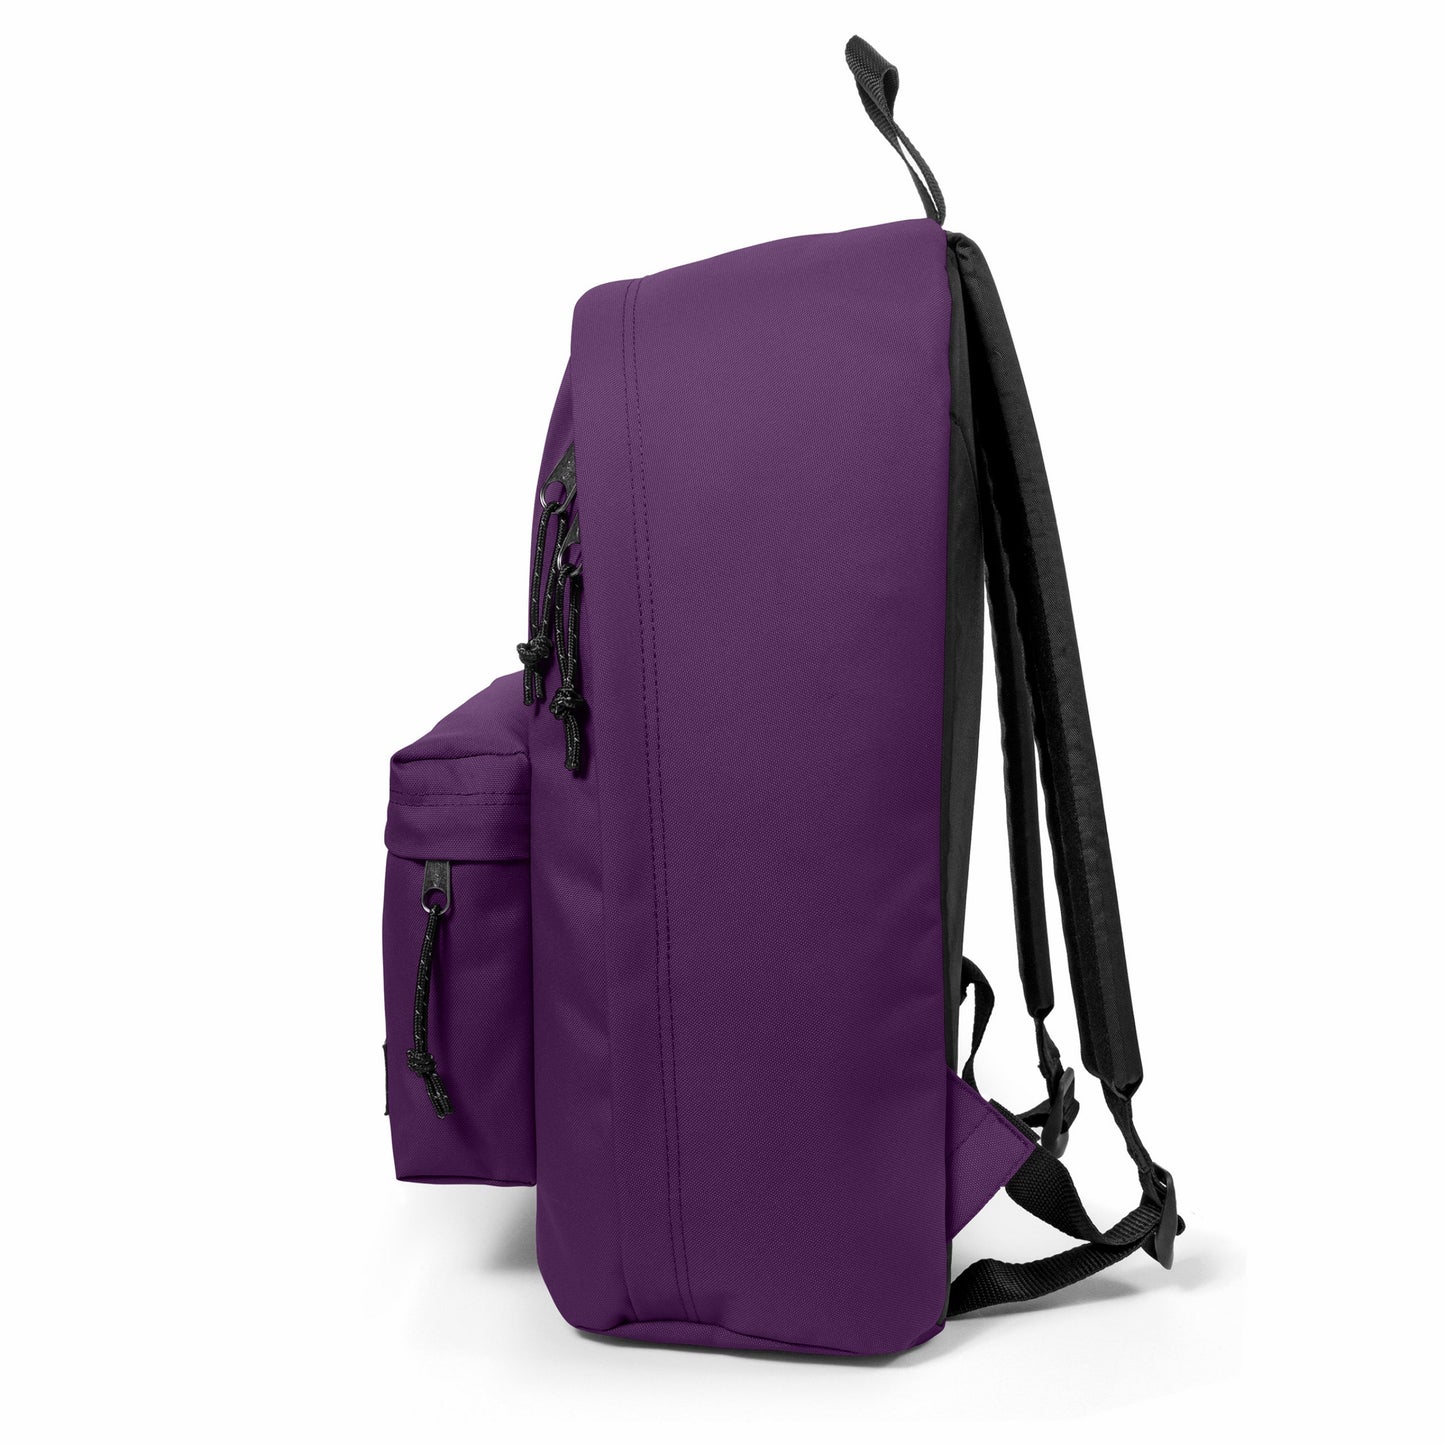 Eastpak  Out of Office  Eggplant Purple